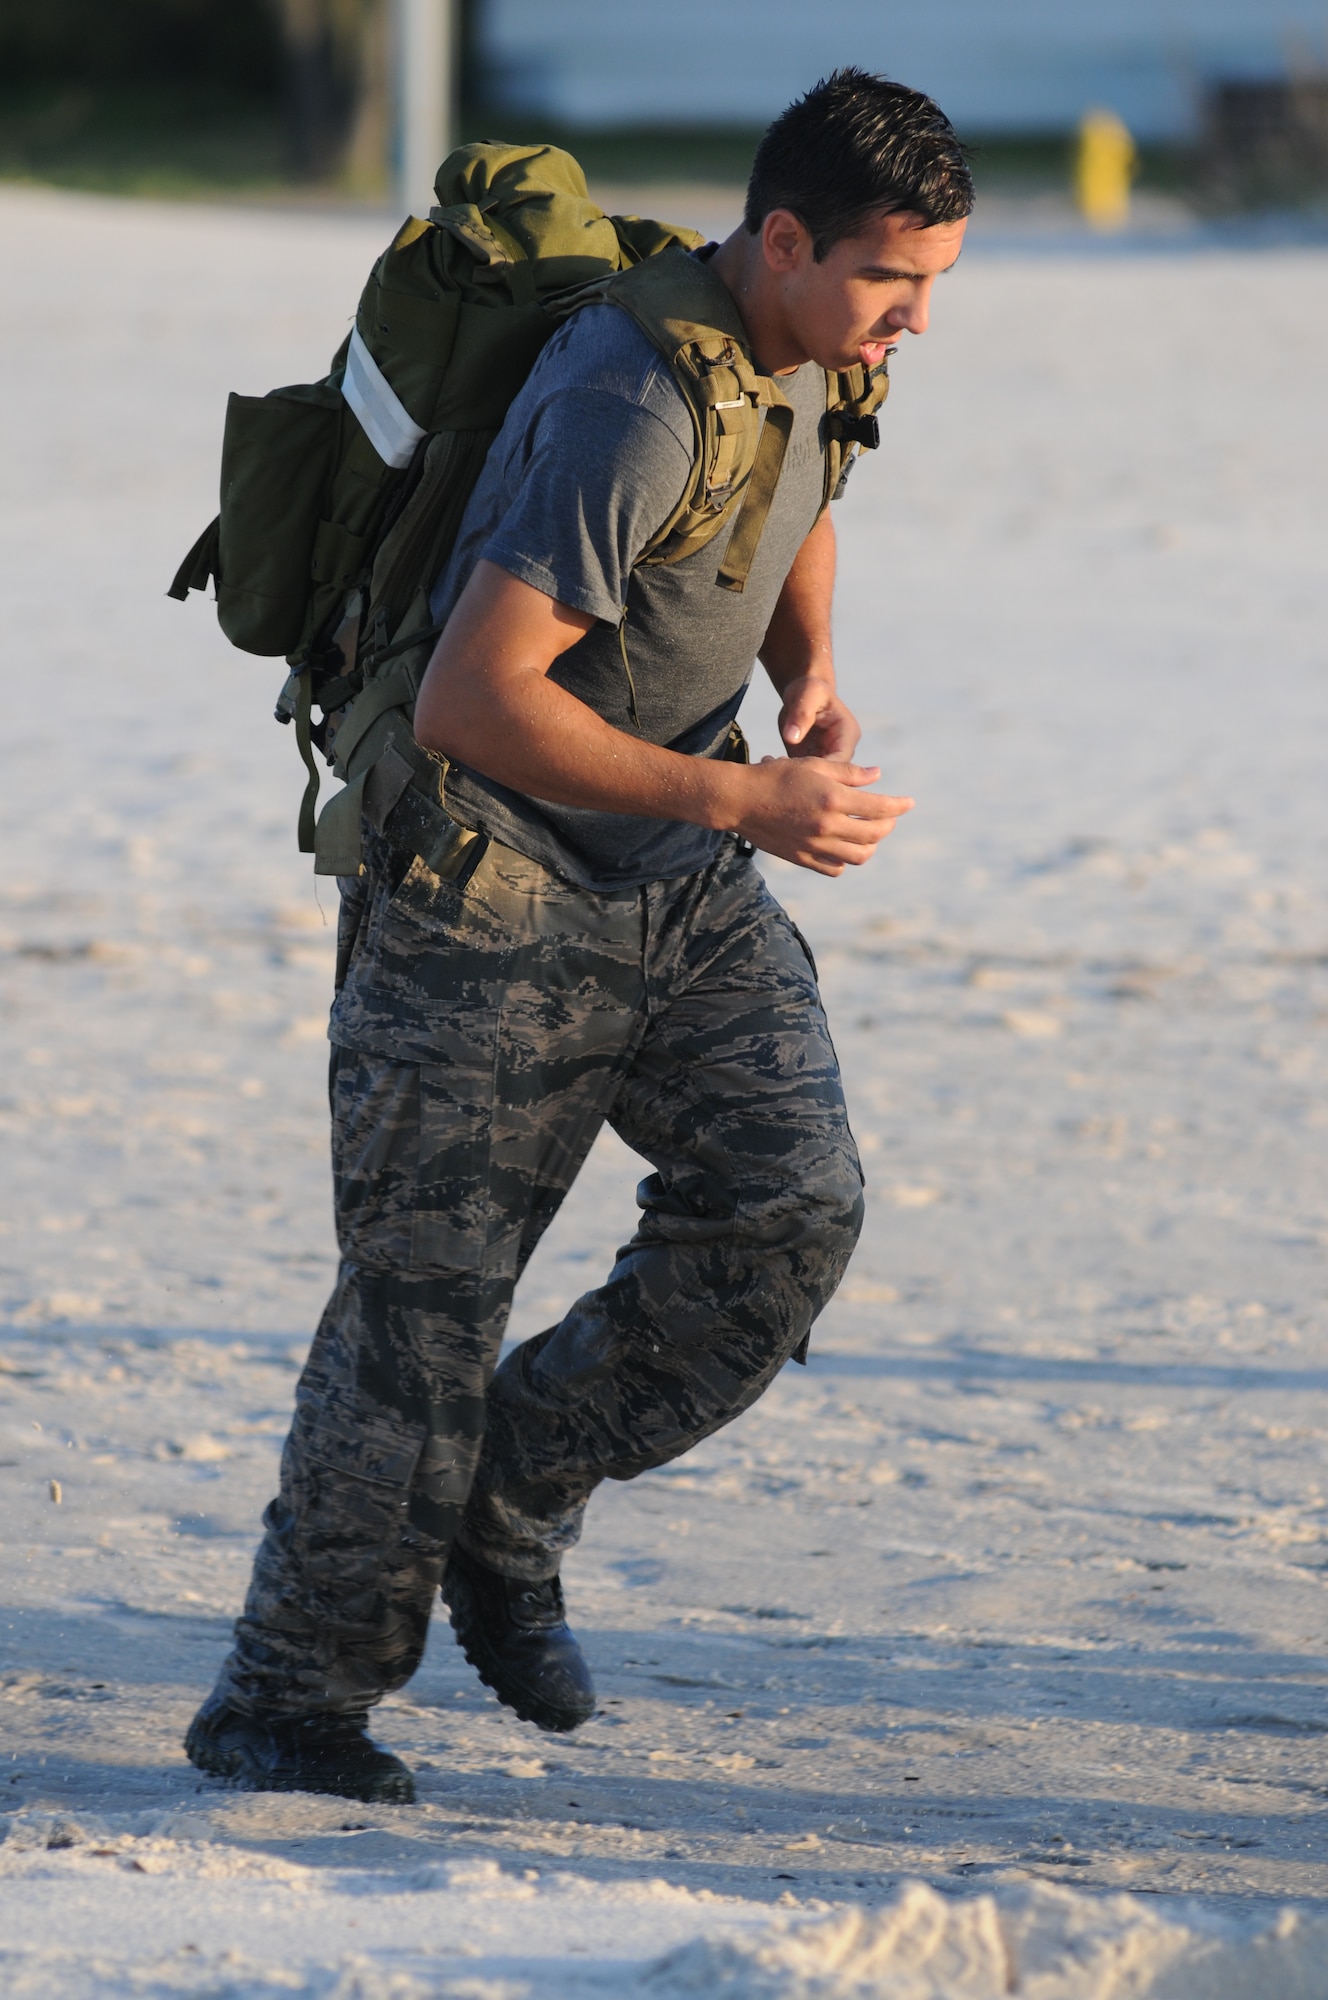 Airman 1st Class Christian Ozuna, 334th Training Squadron, runs along the shoreline to the next workout session while carrying a rucksack on his back during the combat controllers’ physical training session April 12, 2013, on Biloxi beach.  Combat controllers are ground troops who are embedded with special forces teams and provide close-air support for special forces units. While at Keesler, trainees learn how to run, swim, carry a rucksack and conduct air traffic control. These Airmen are prepared physically and mentally for the demands of the combat controller pipeline while earning air traffic control certification in just 15 weeks.  (U.S. Air Force photo by Kemberly Groue)